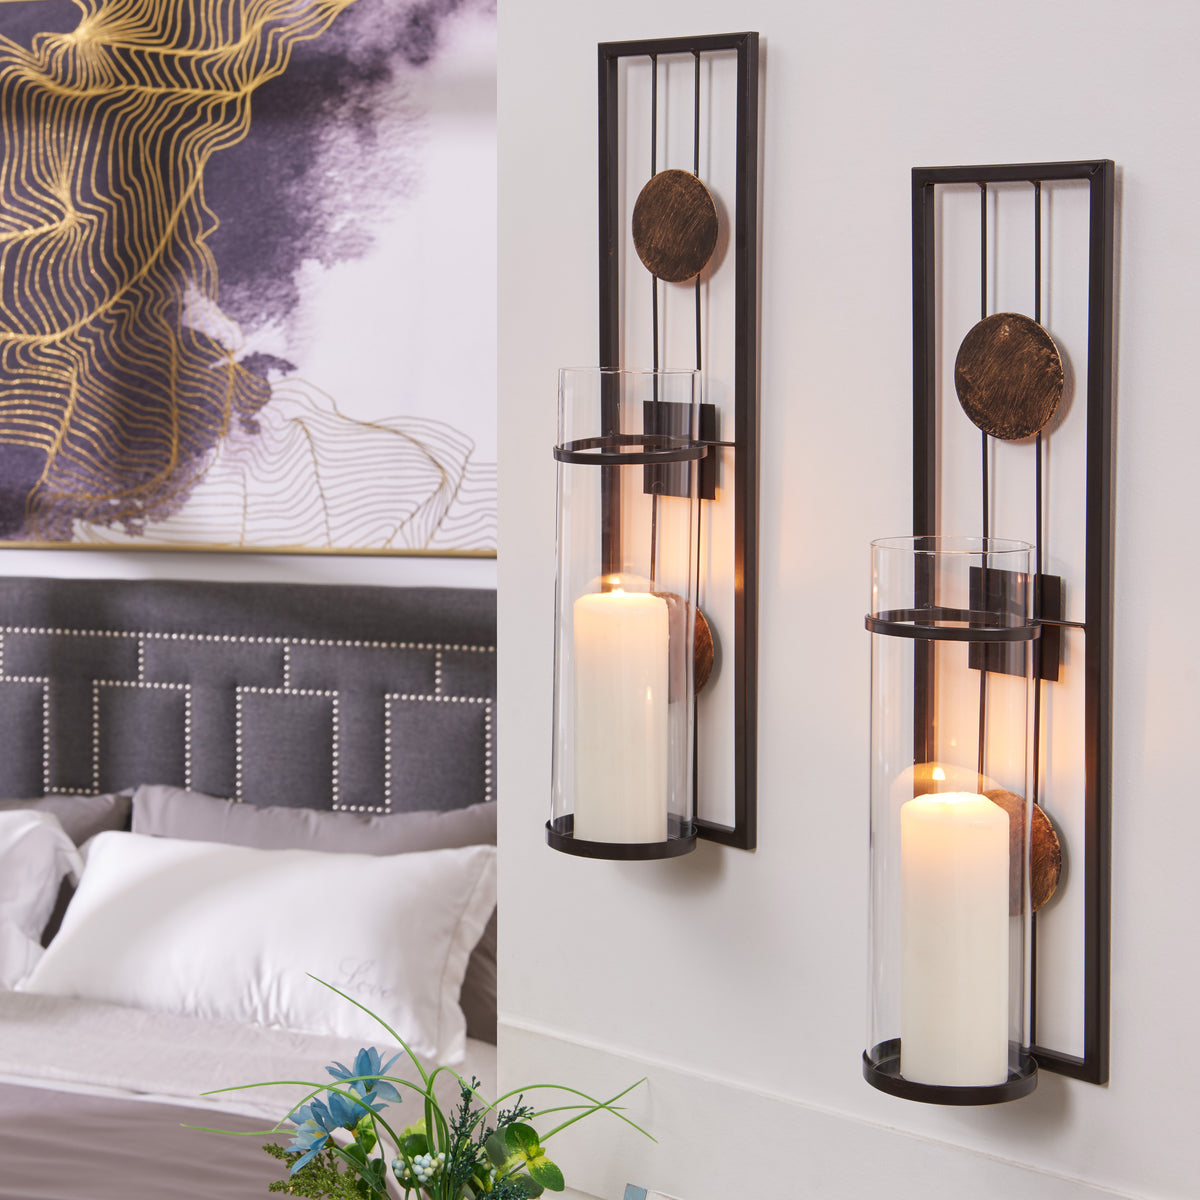 Elevate Your Space with Stylish Wall Mounted Candle Holders